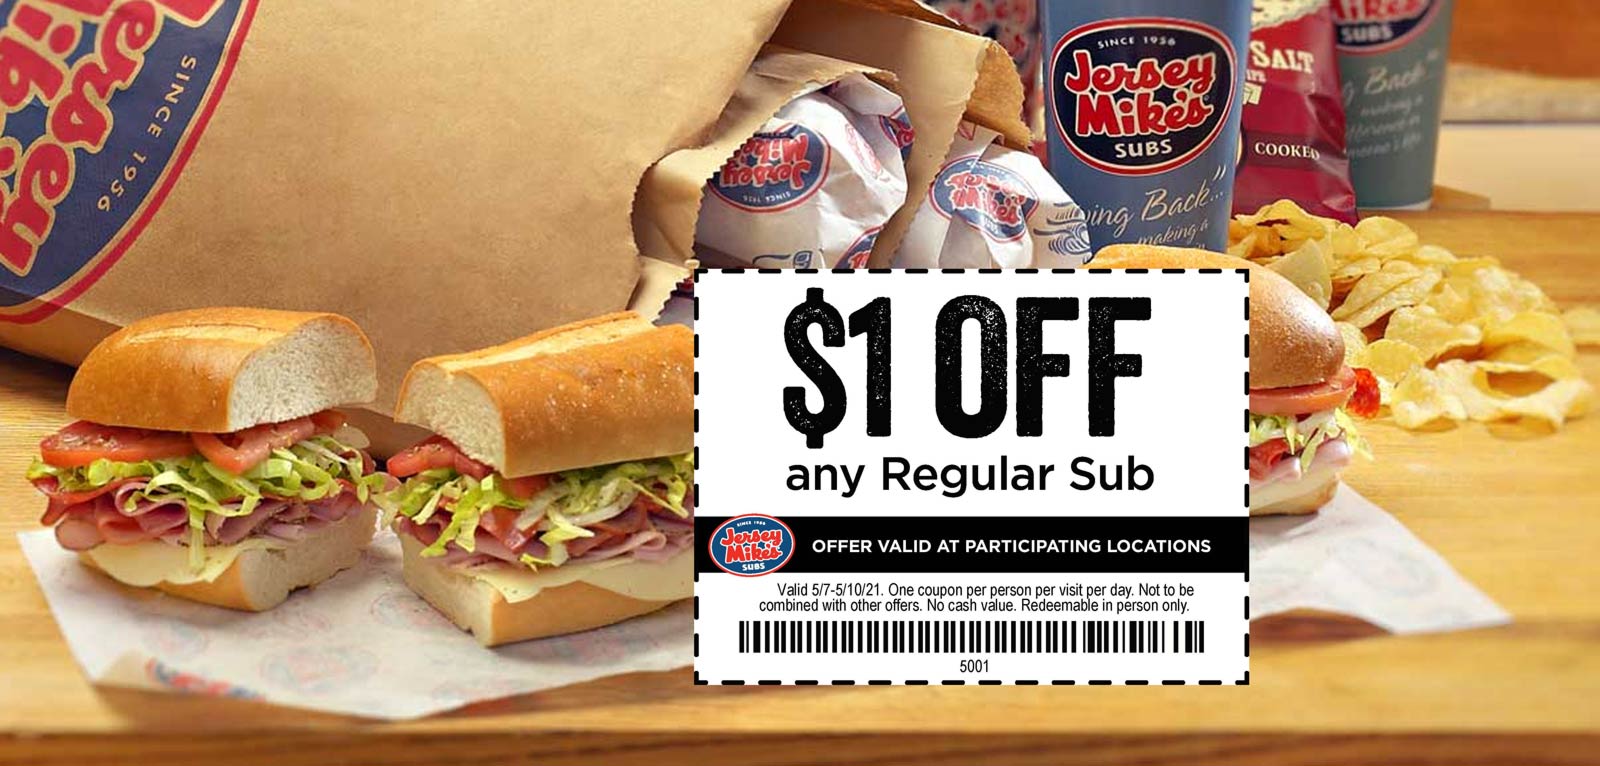 Jersey Mikes restaurants Coupon  $1 off any sub sandwich at Jersey Mikes, or online via promo code MOM #jerseymikes 